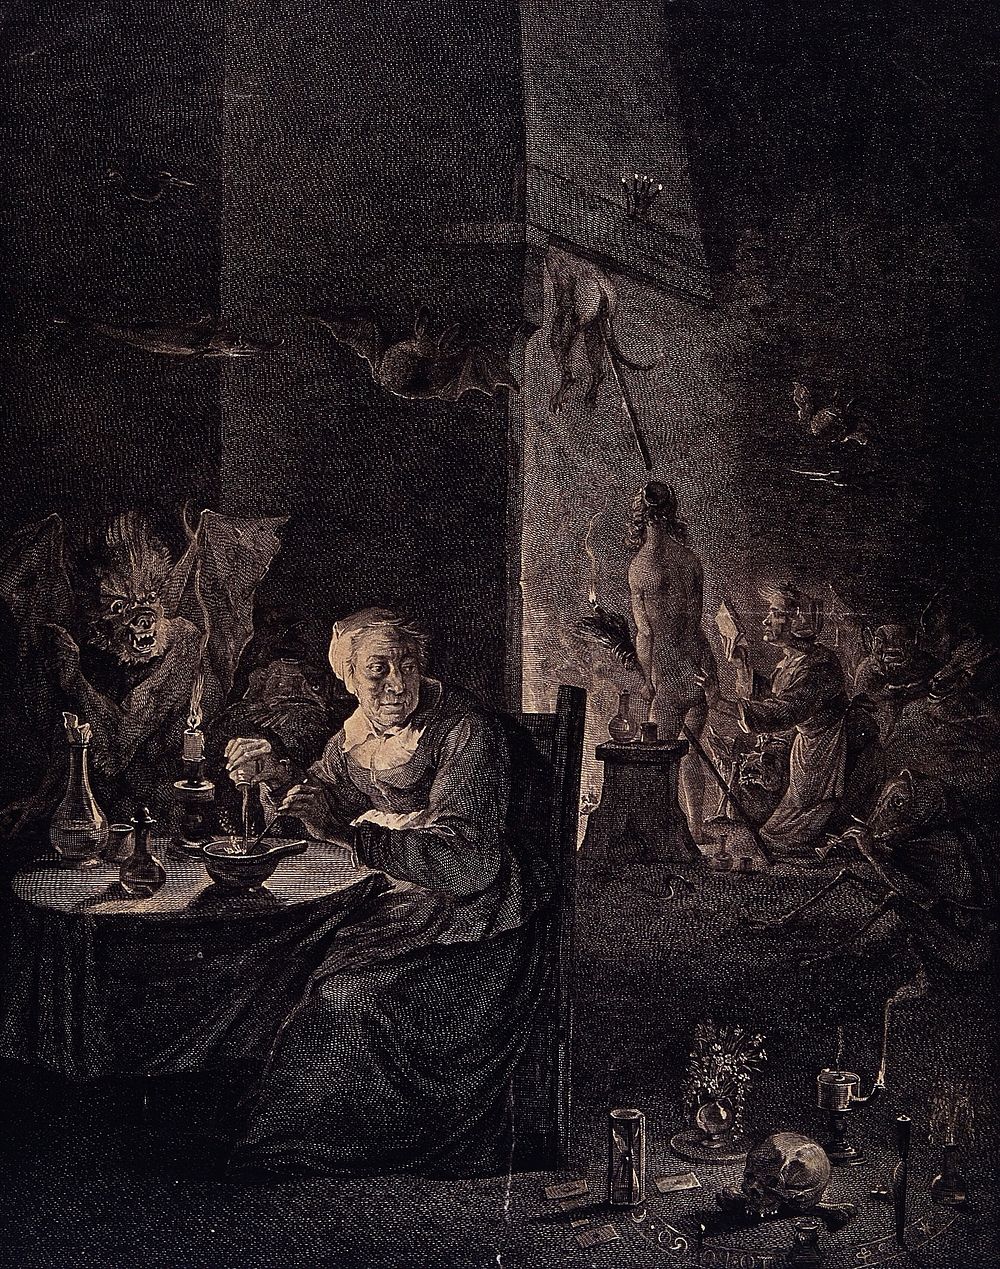 Preparation for the witches' sabbath. Engraving by J. Aliamet after D. Teniers the younger, 1755.